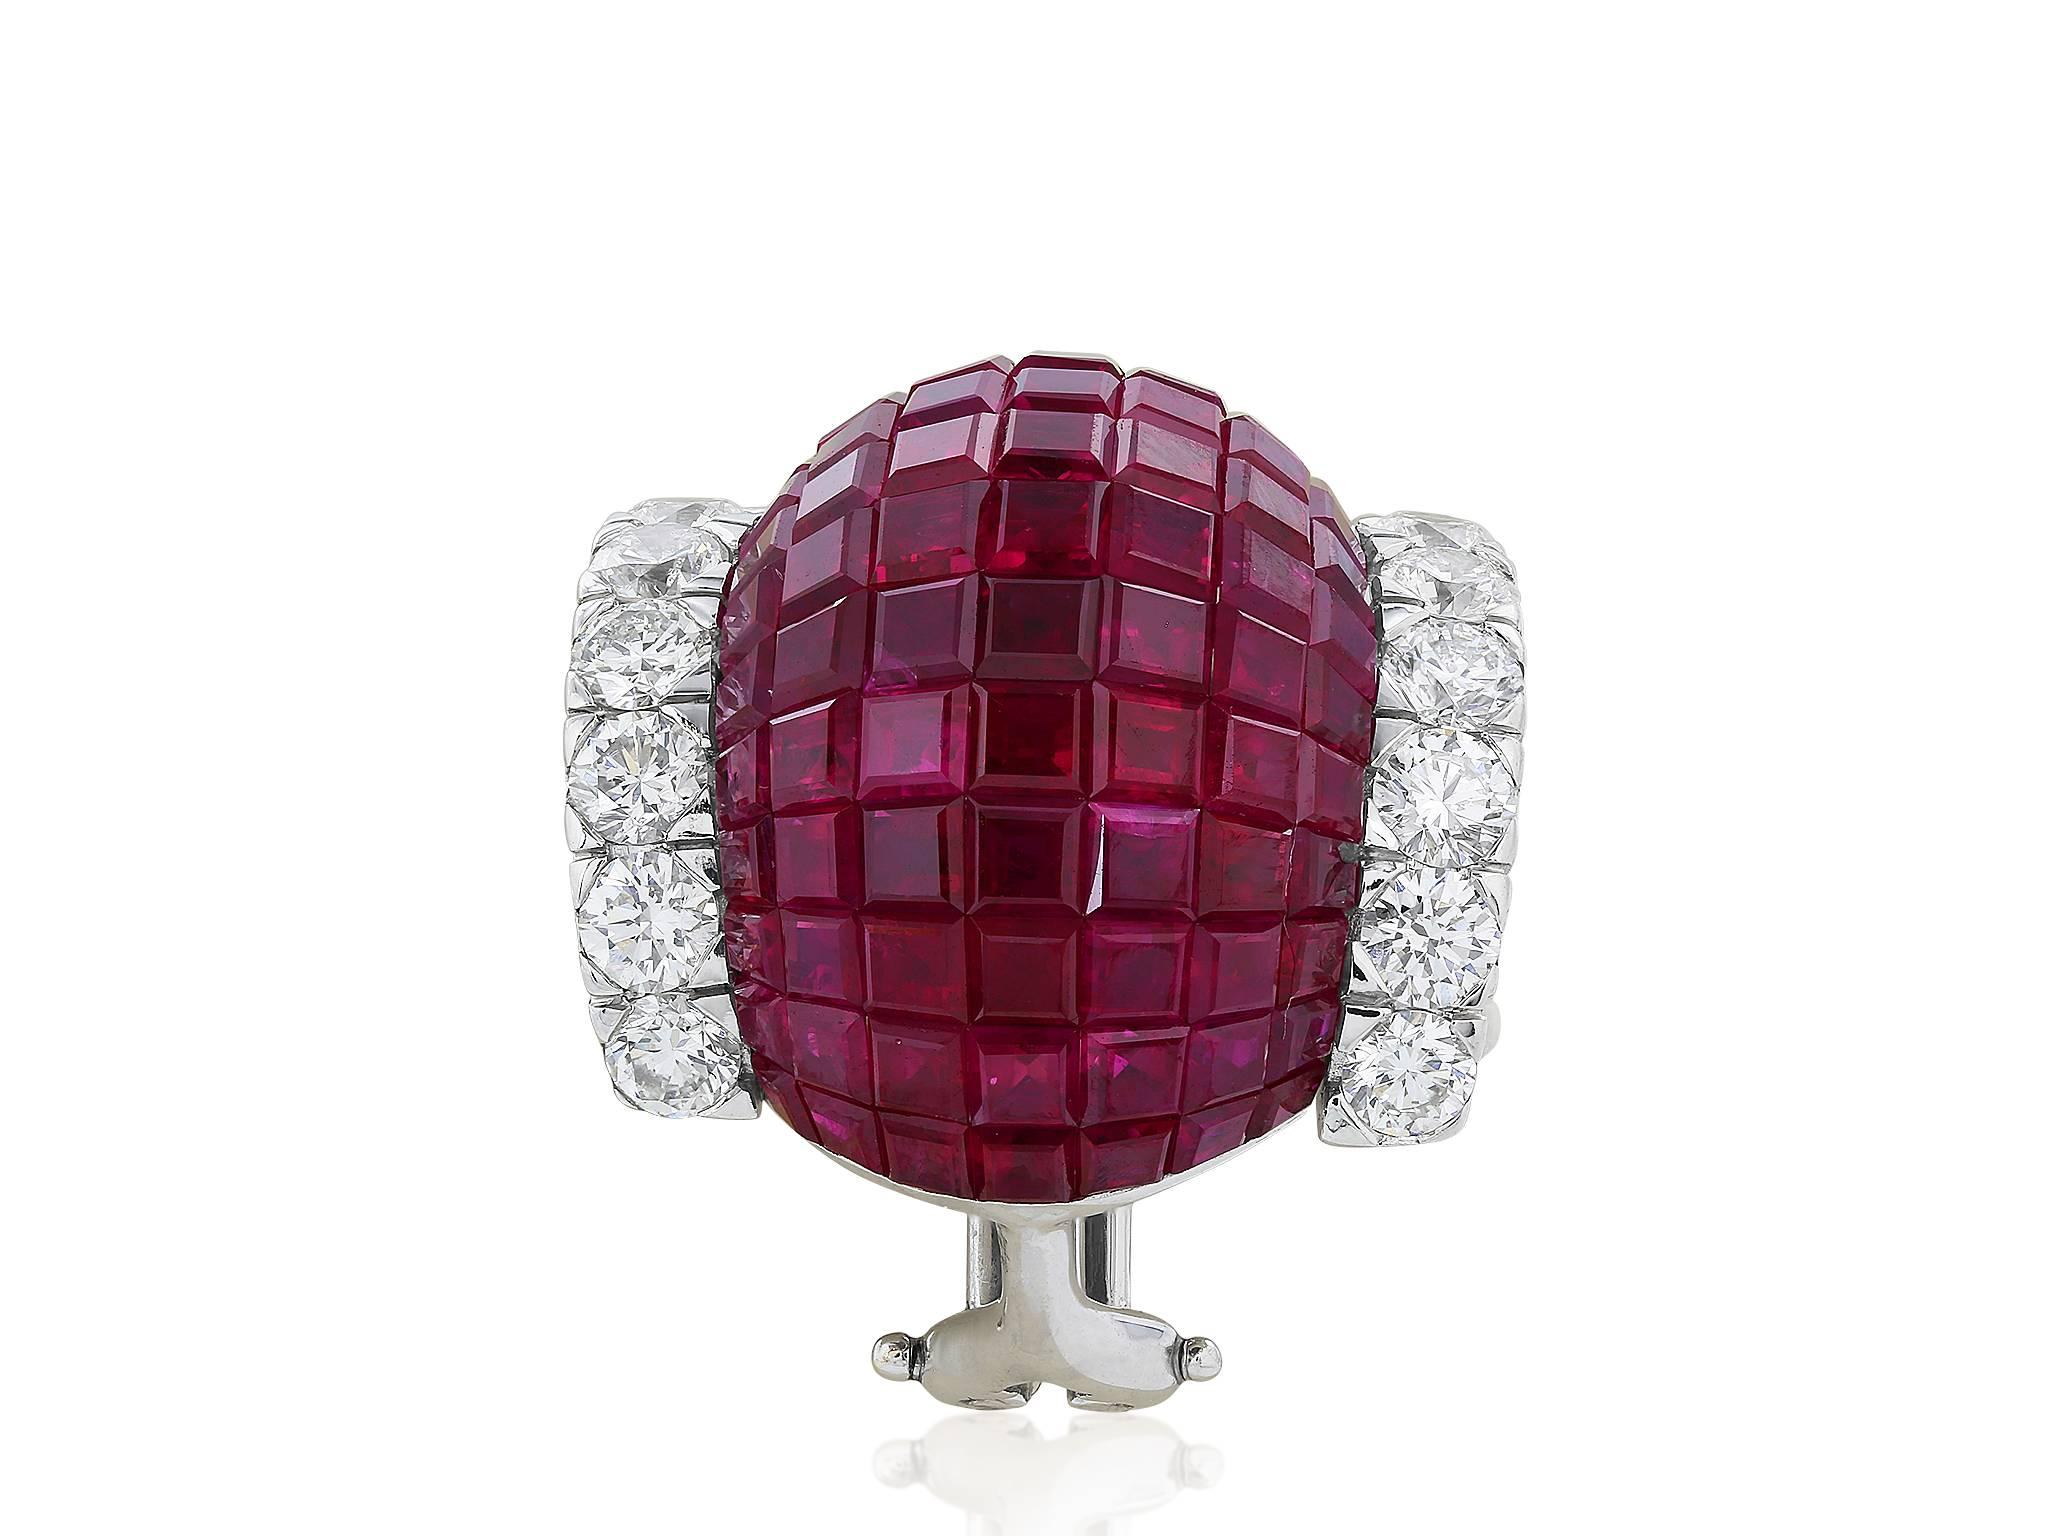 18 karat white gold clip earrings consisting of 182 invisible square cut rubies having a total weight 16.59 carats set with 36 round brilliant cut diamonds having a total weight of 1.58 carats.